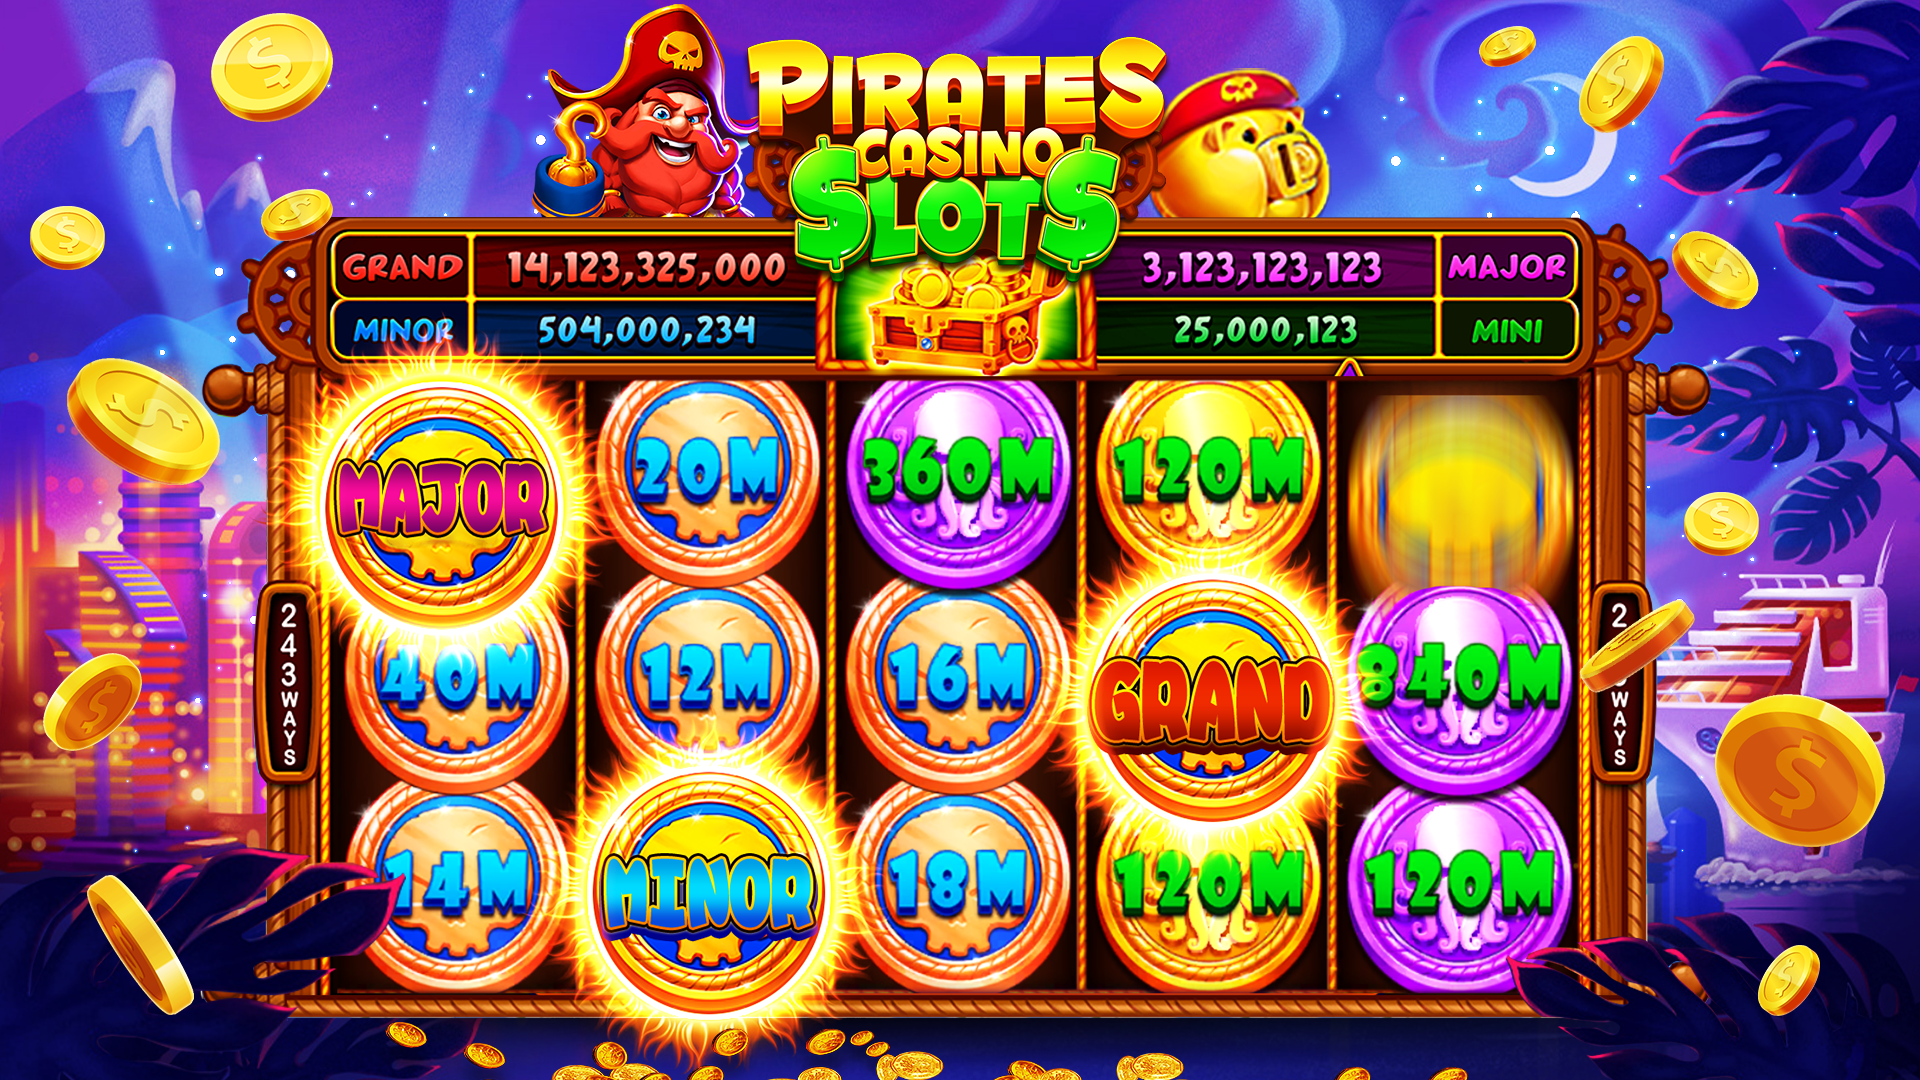 Play Pirate Slots Online for Free on PC & Mobile